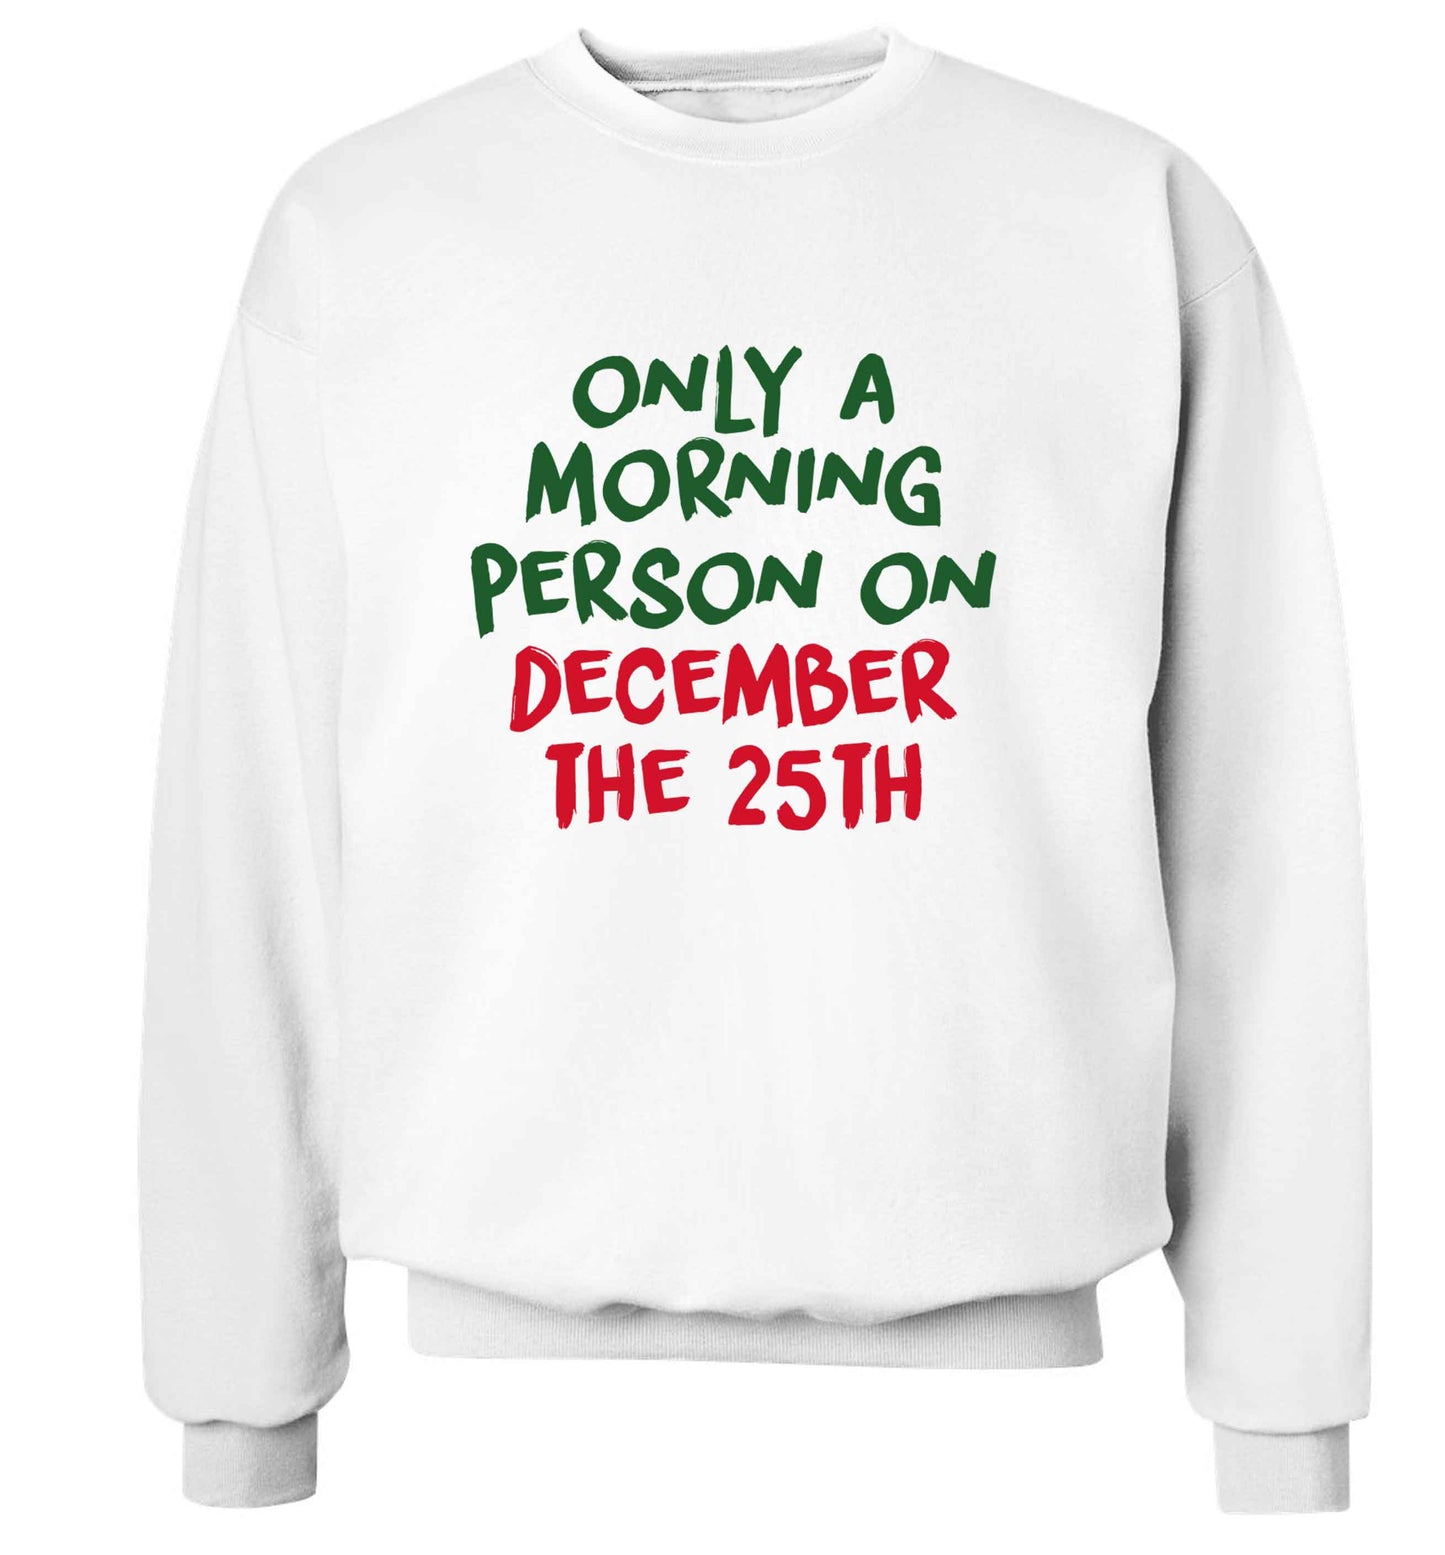 I'm only a morning person on December the 25th adult's unisex white sweater 2XL